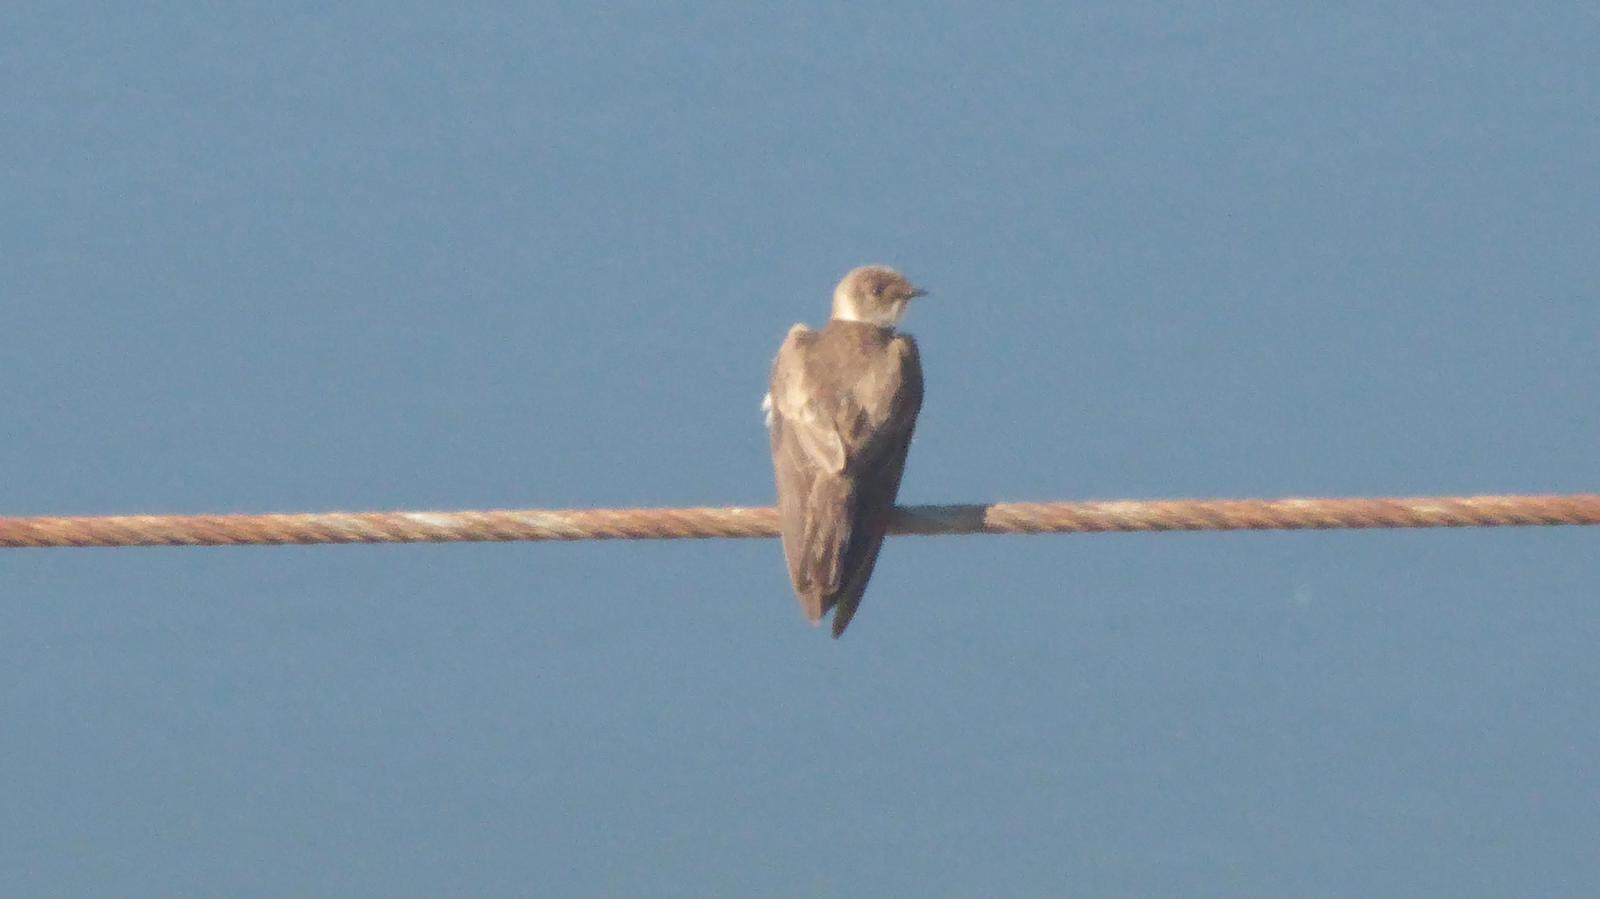 Northern Rough-winged Swallow Photo by Daliel Leite